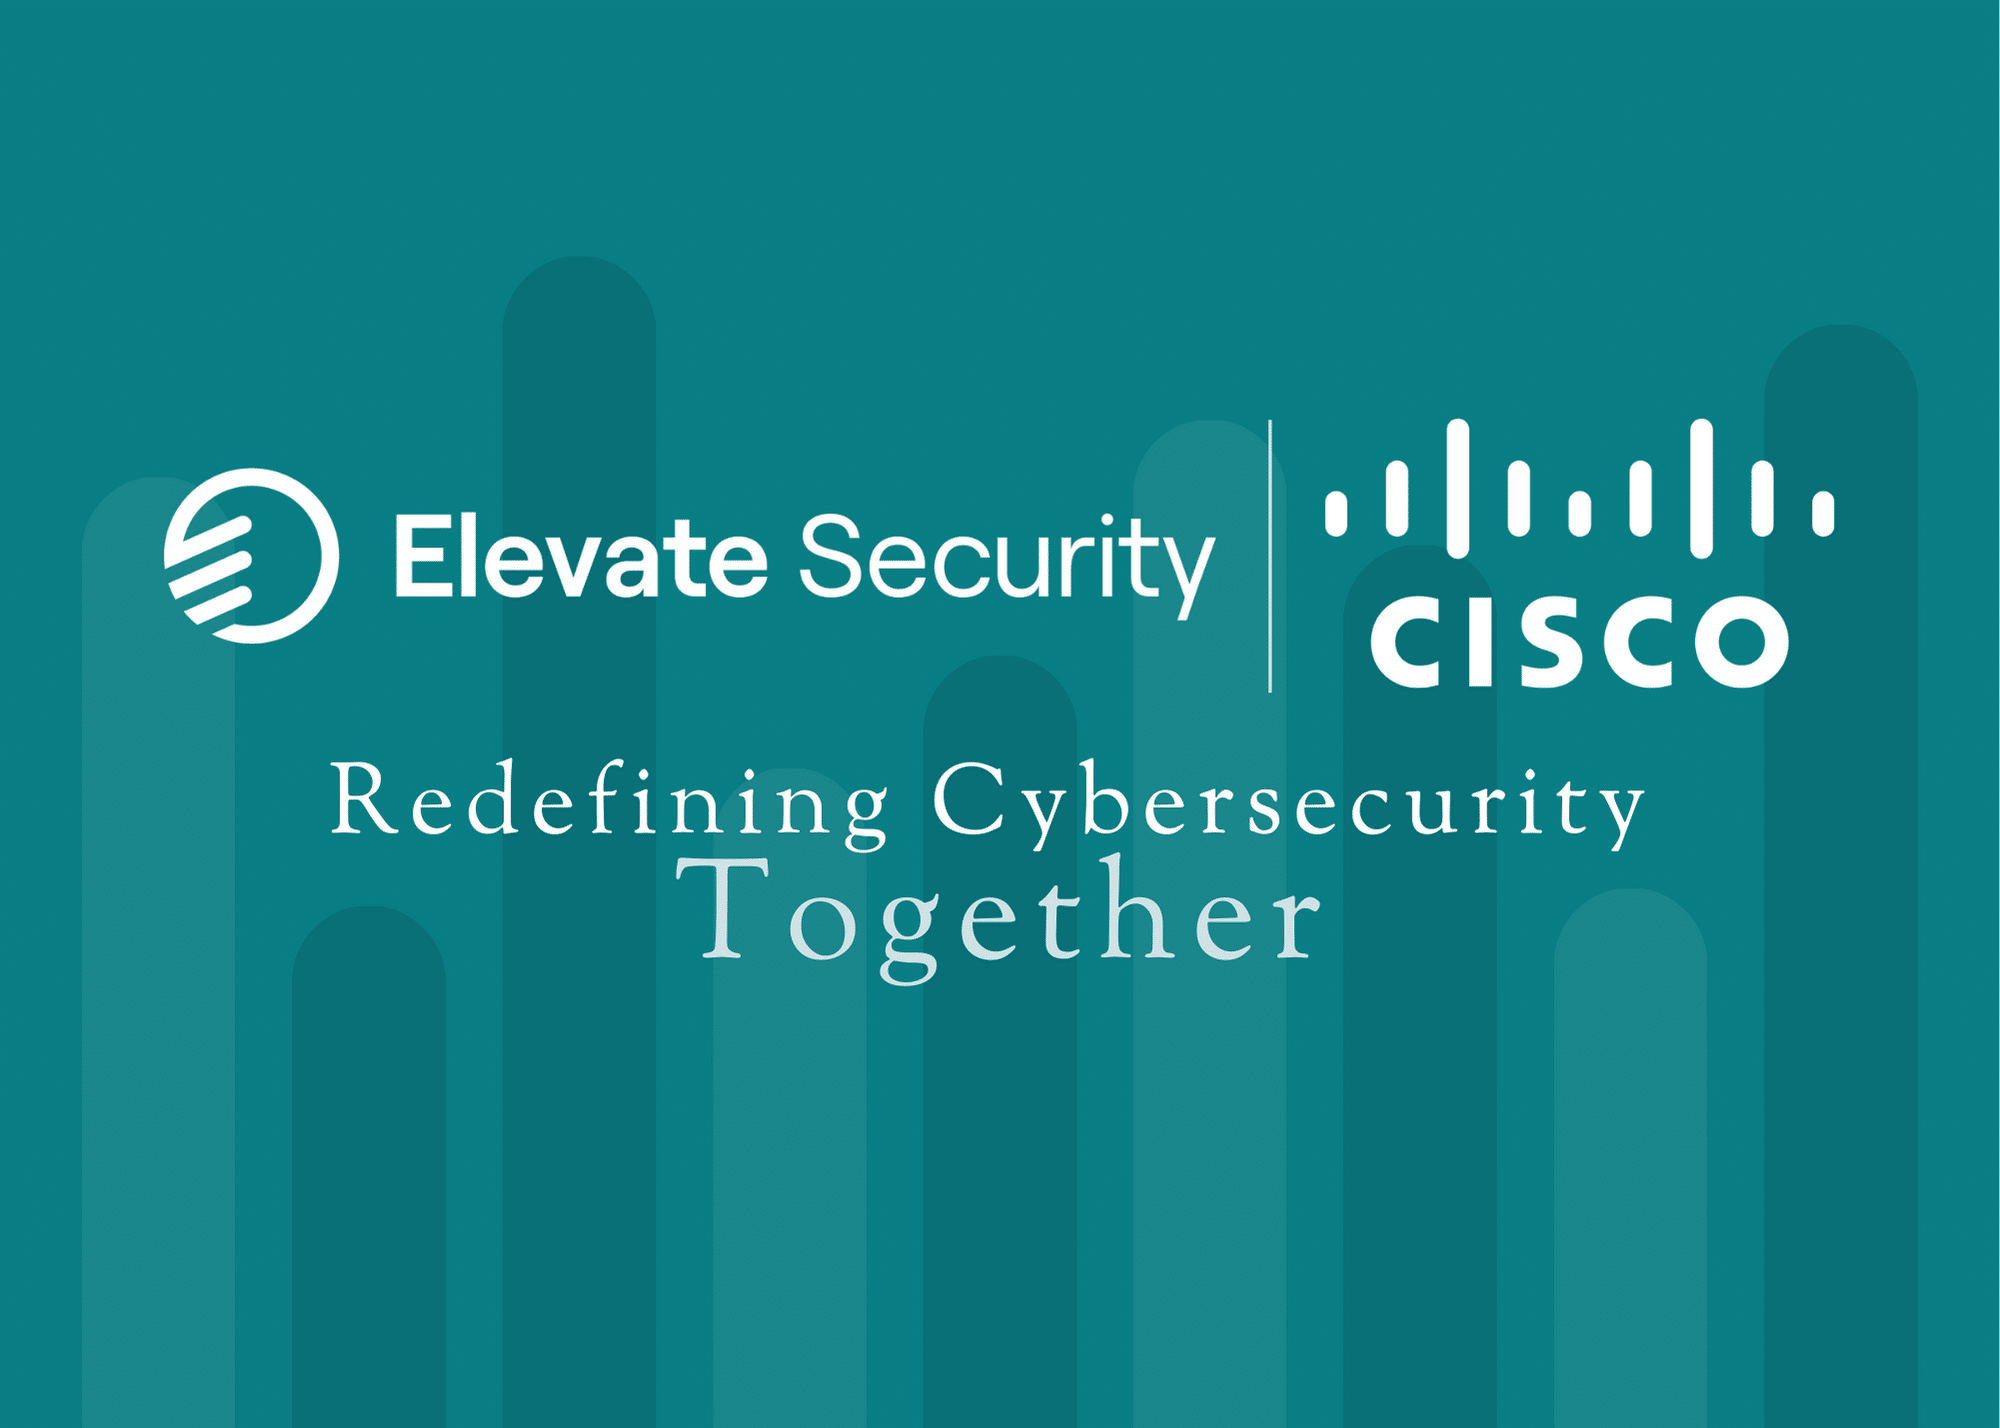 Dive into a couple of use cases to show off what Elevate + Cisco can do together.